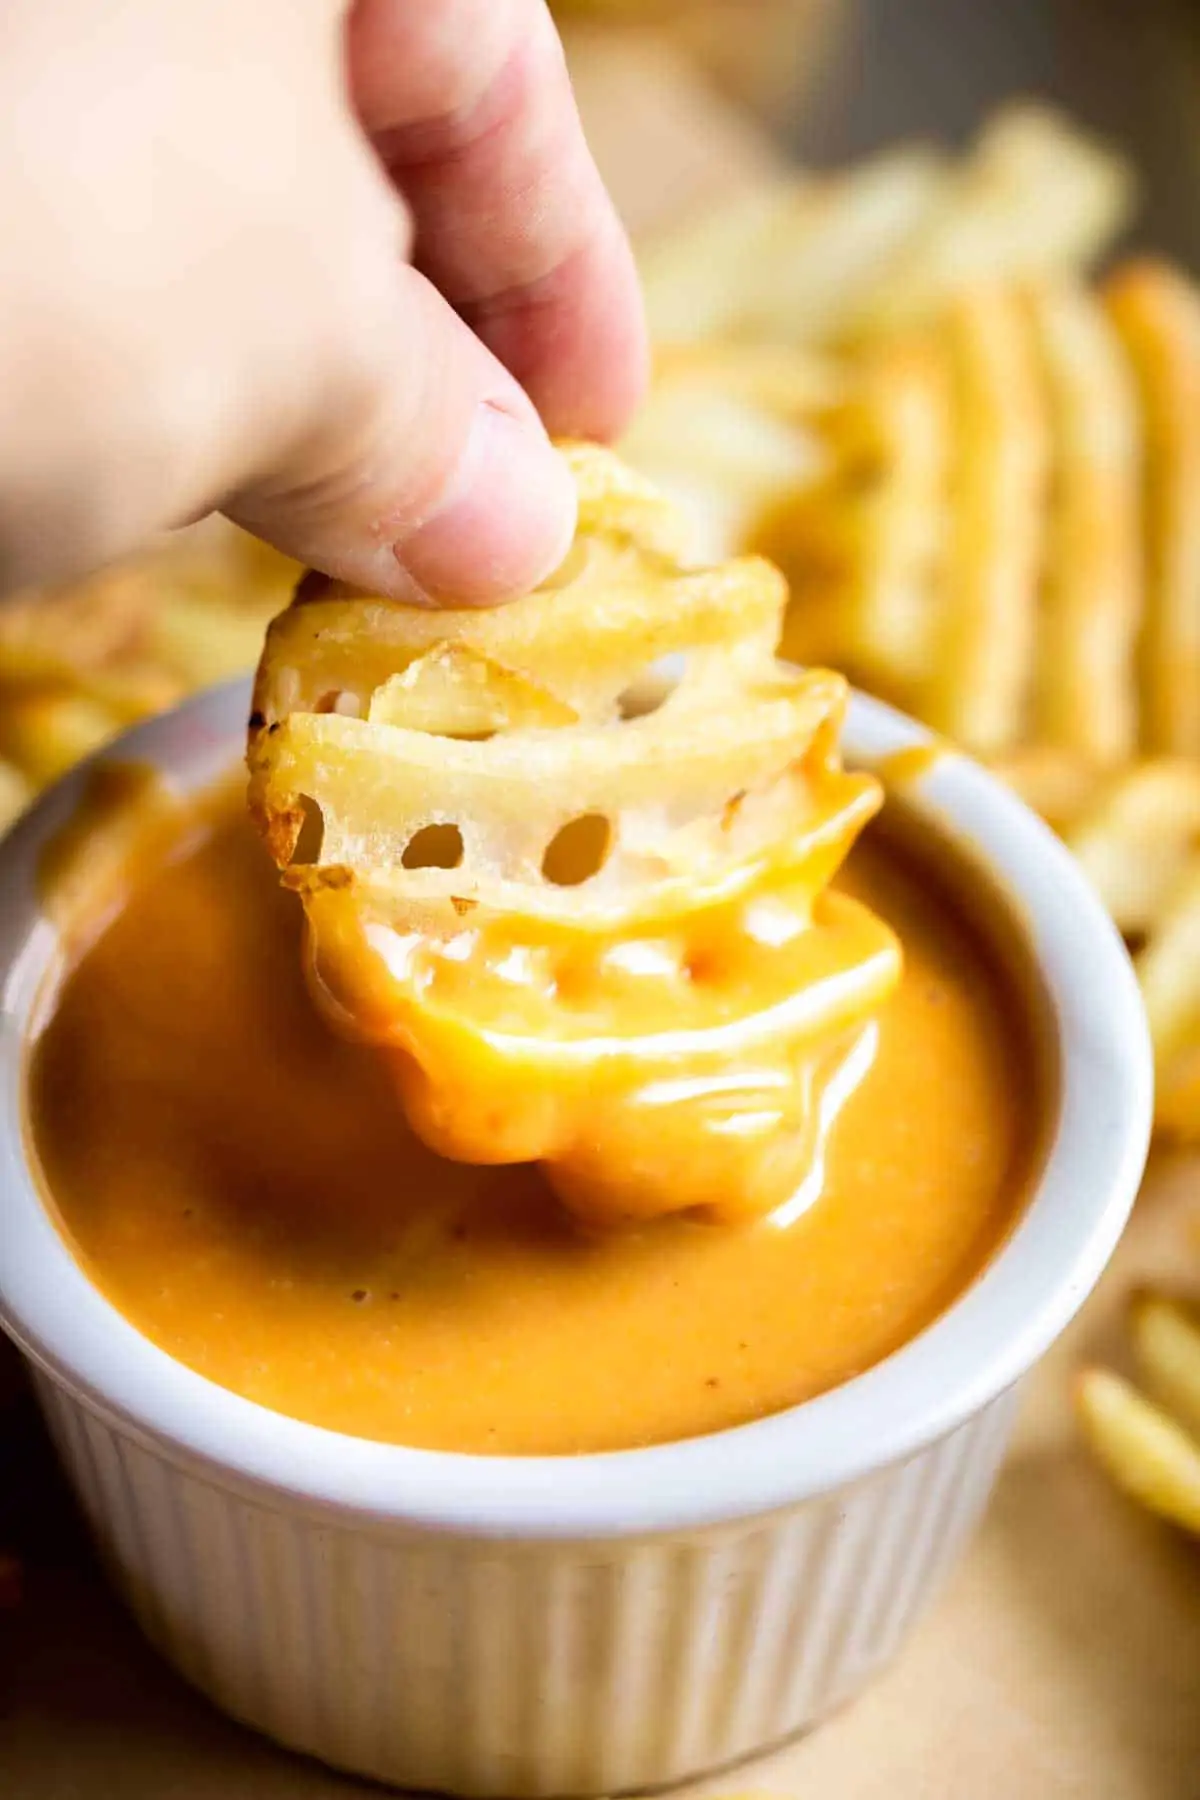 Dipping a waffle fry into a small bowl of homemade Chick Fil A Sauce.